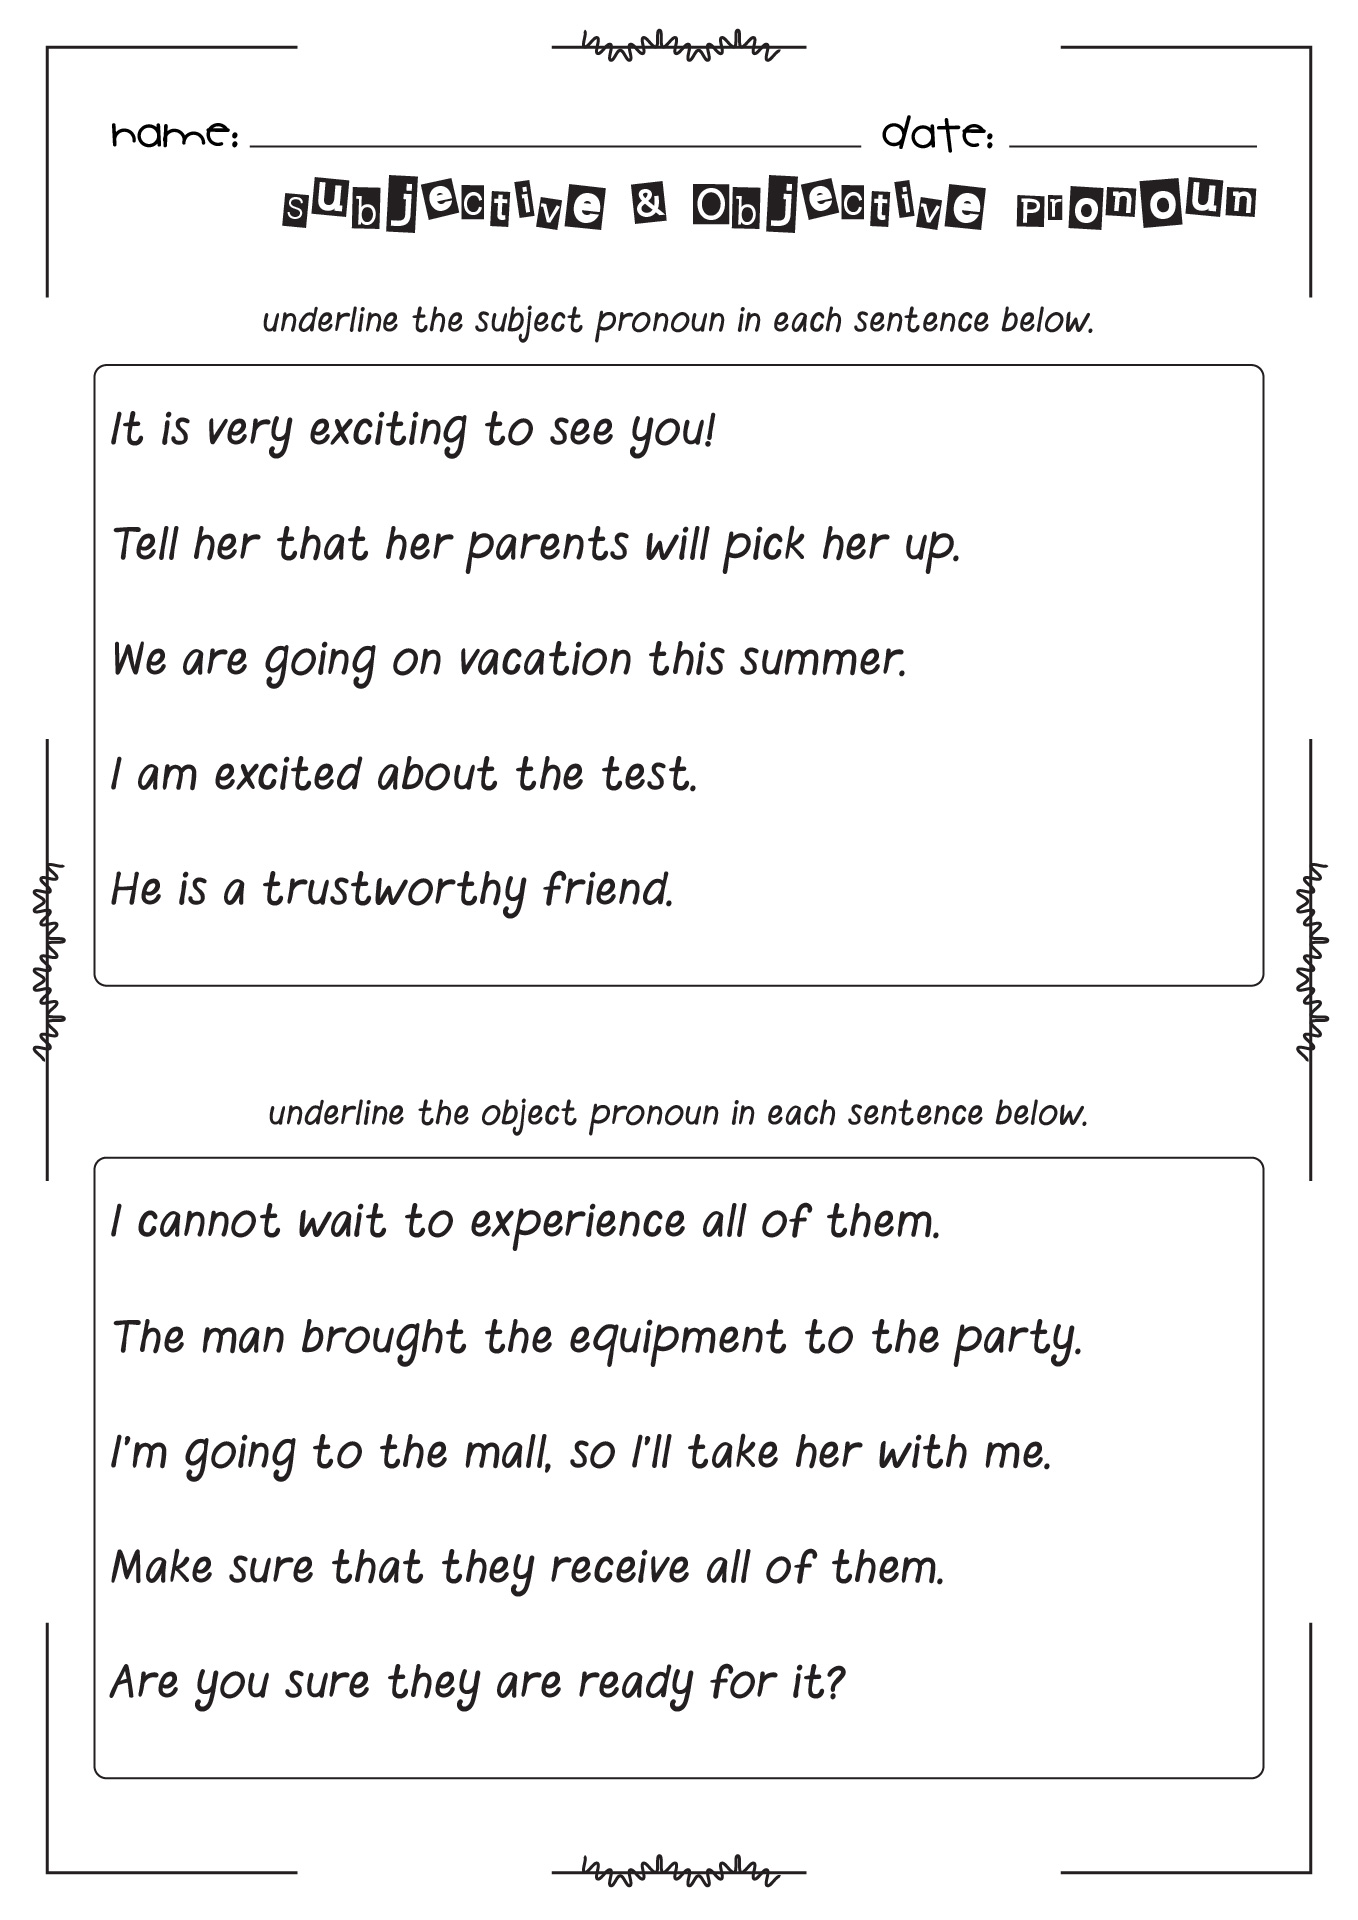 Subjective and Objective Pronouns Worksheets